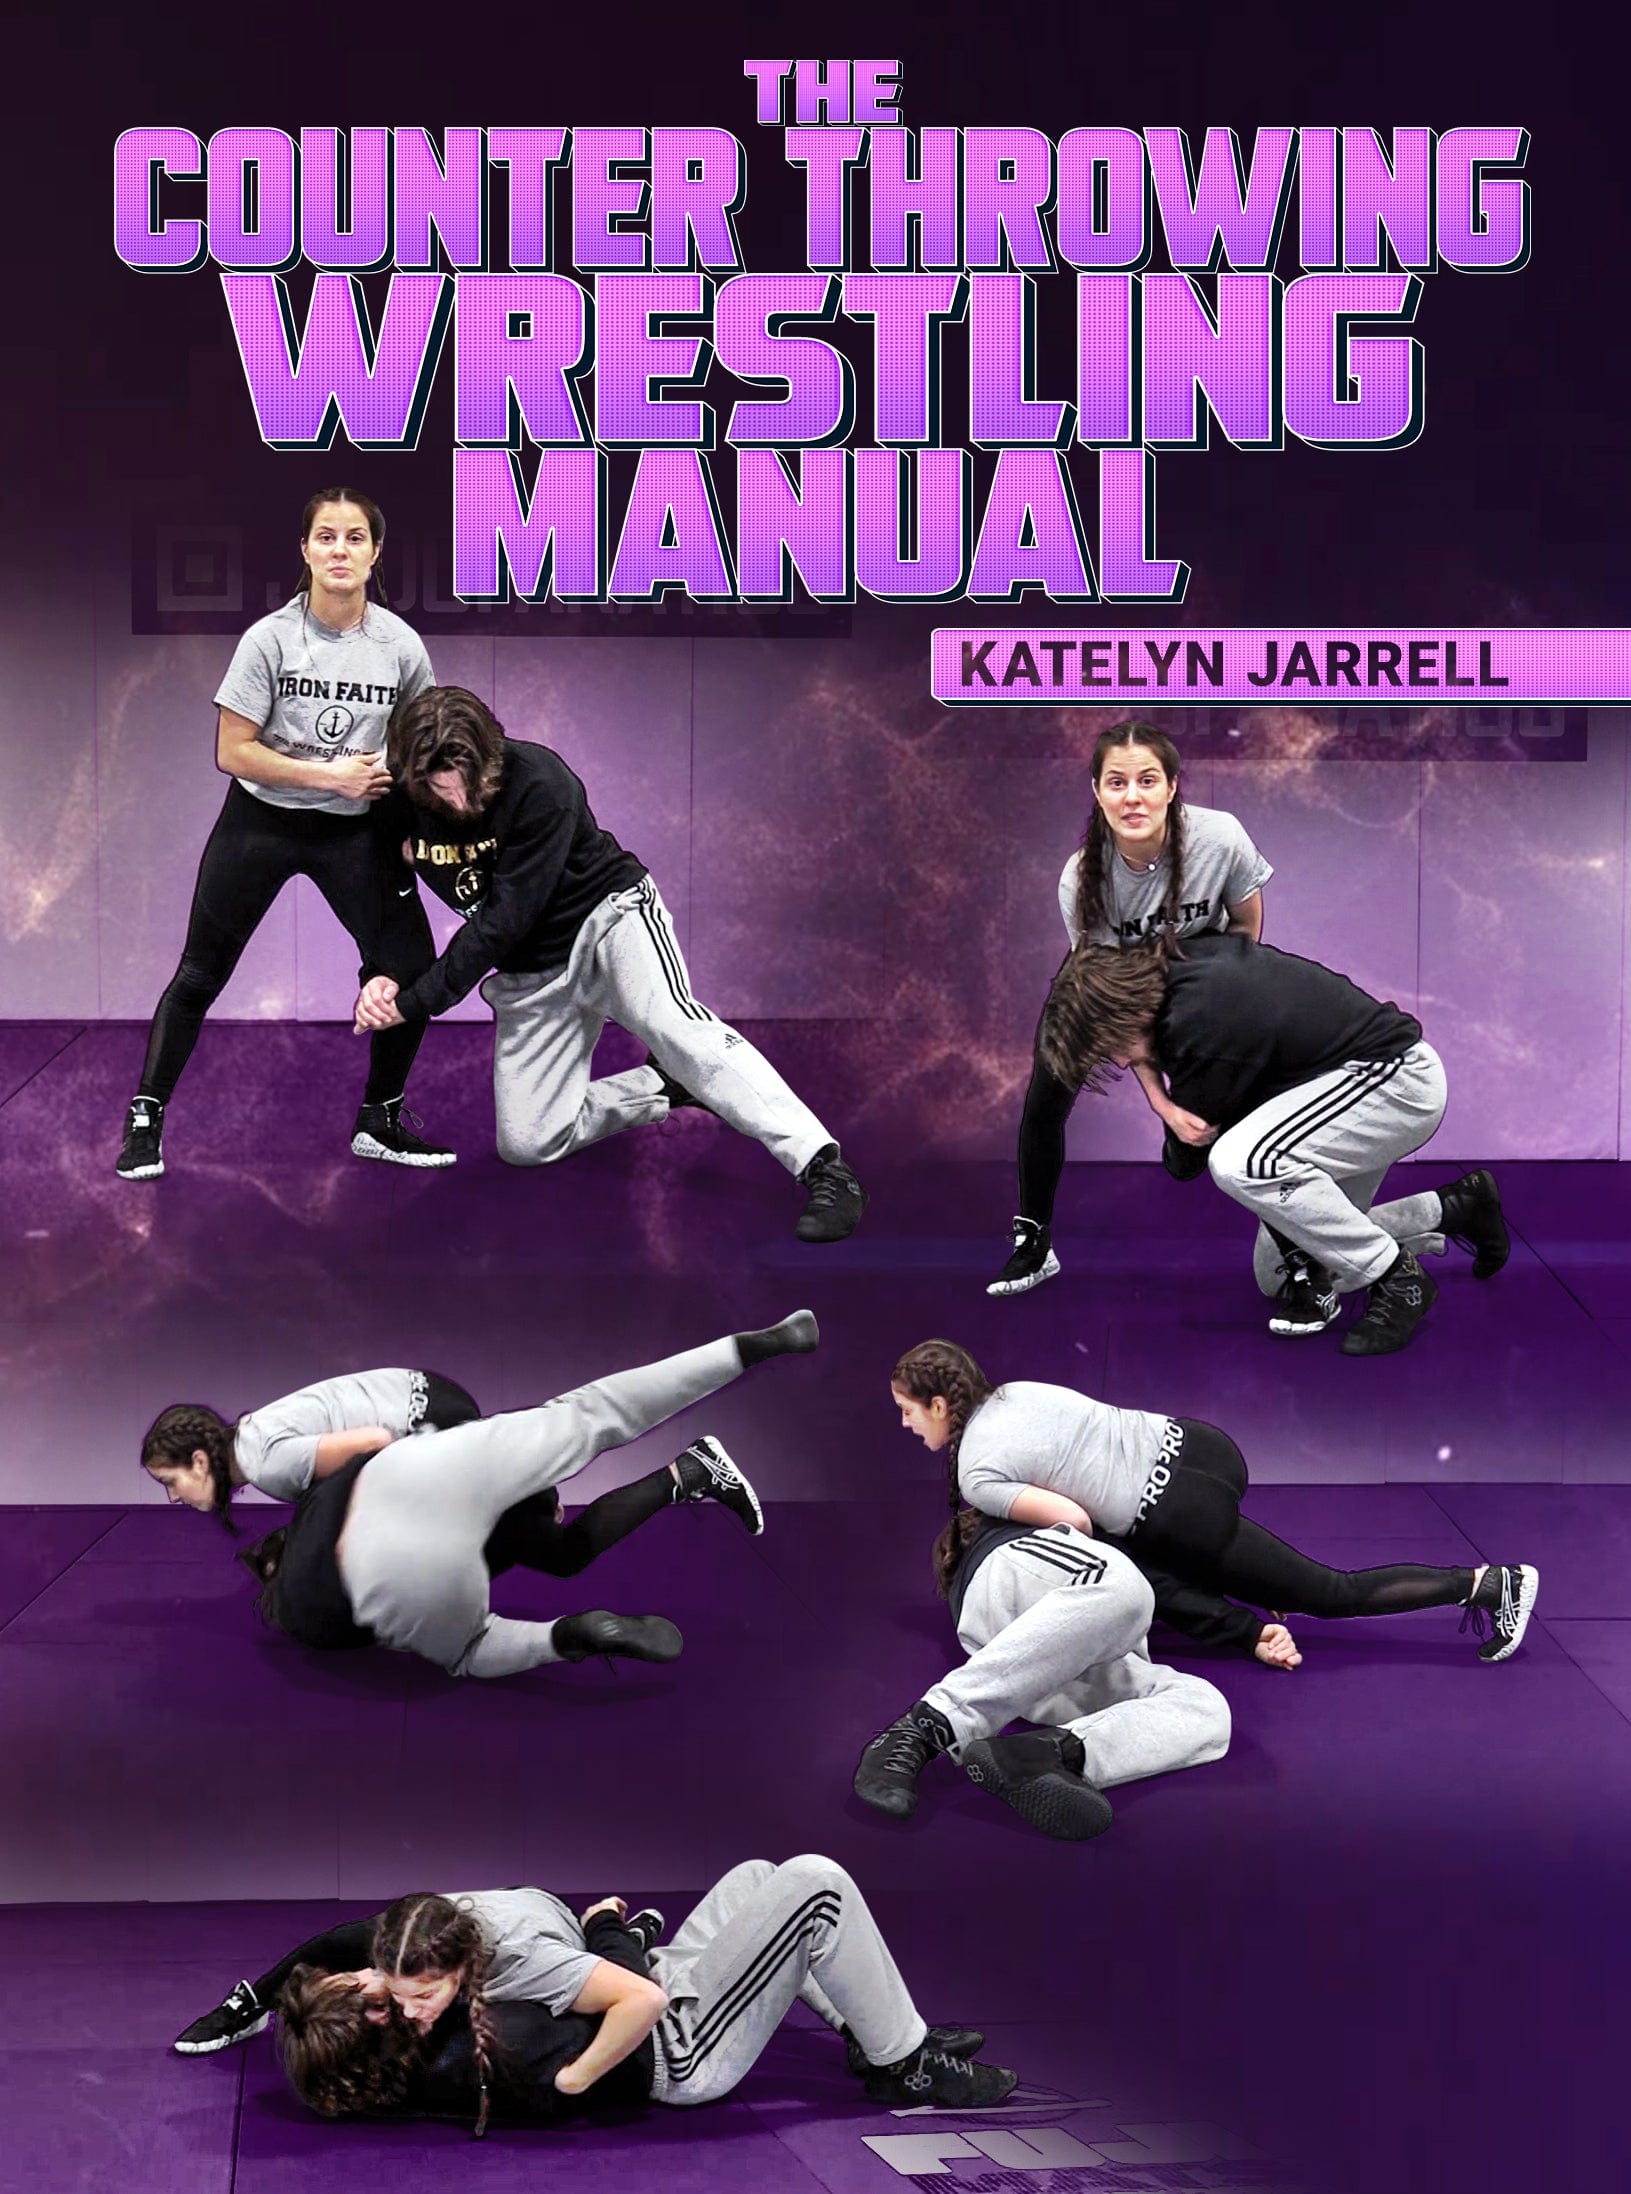 The Counter Throwing Wrestling Manual by Katelyn Jarrell - Fanatic Wrestling